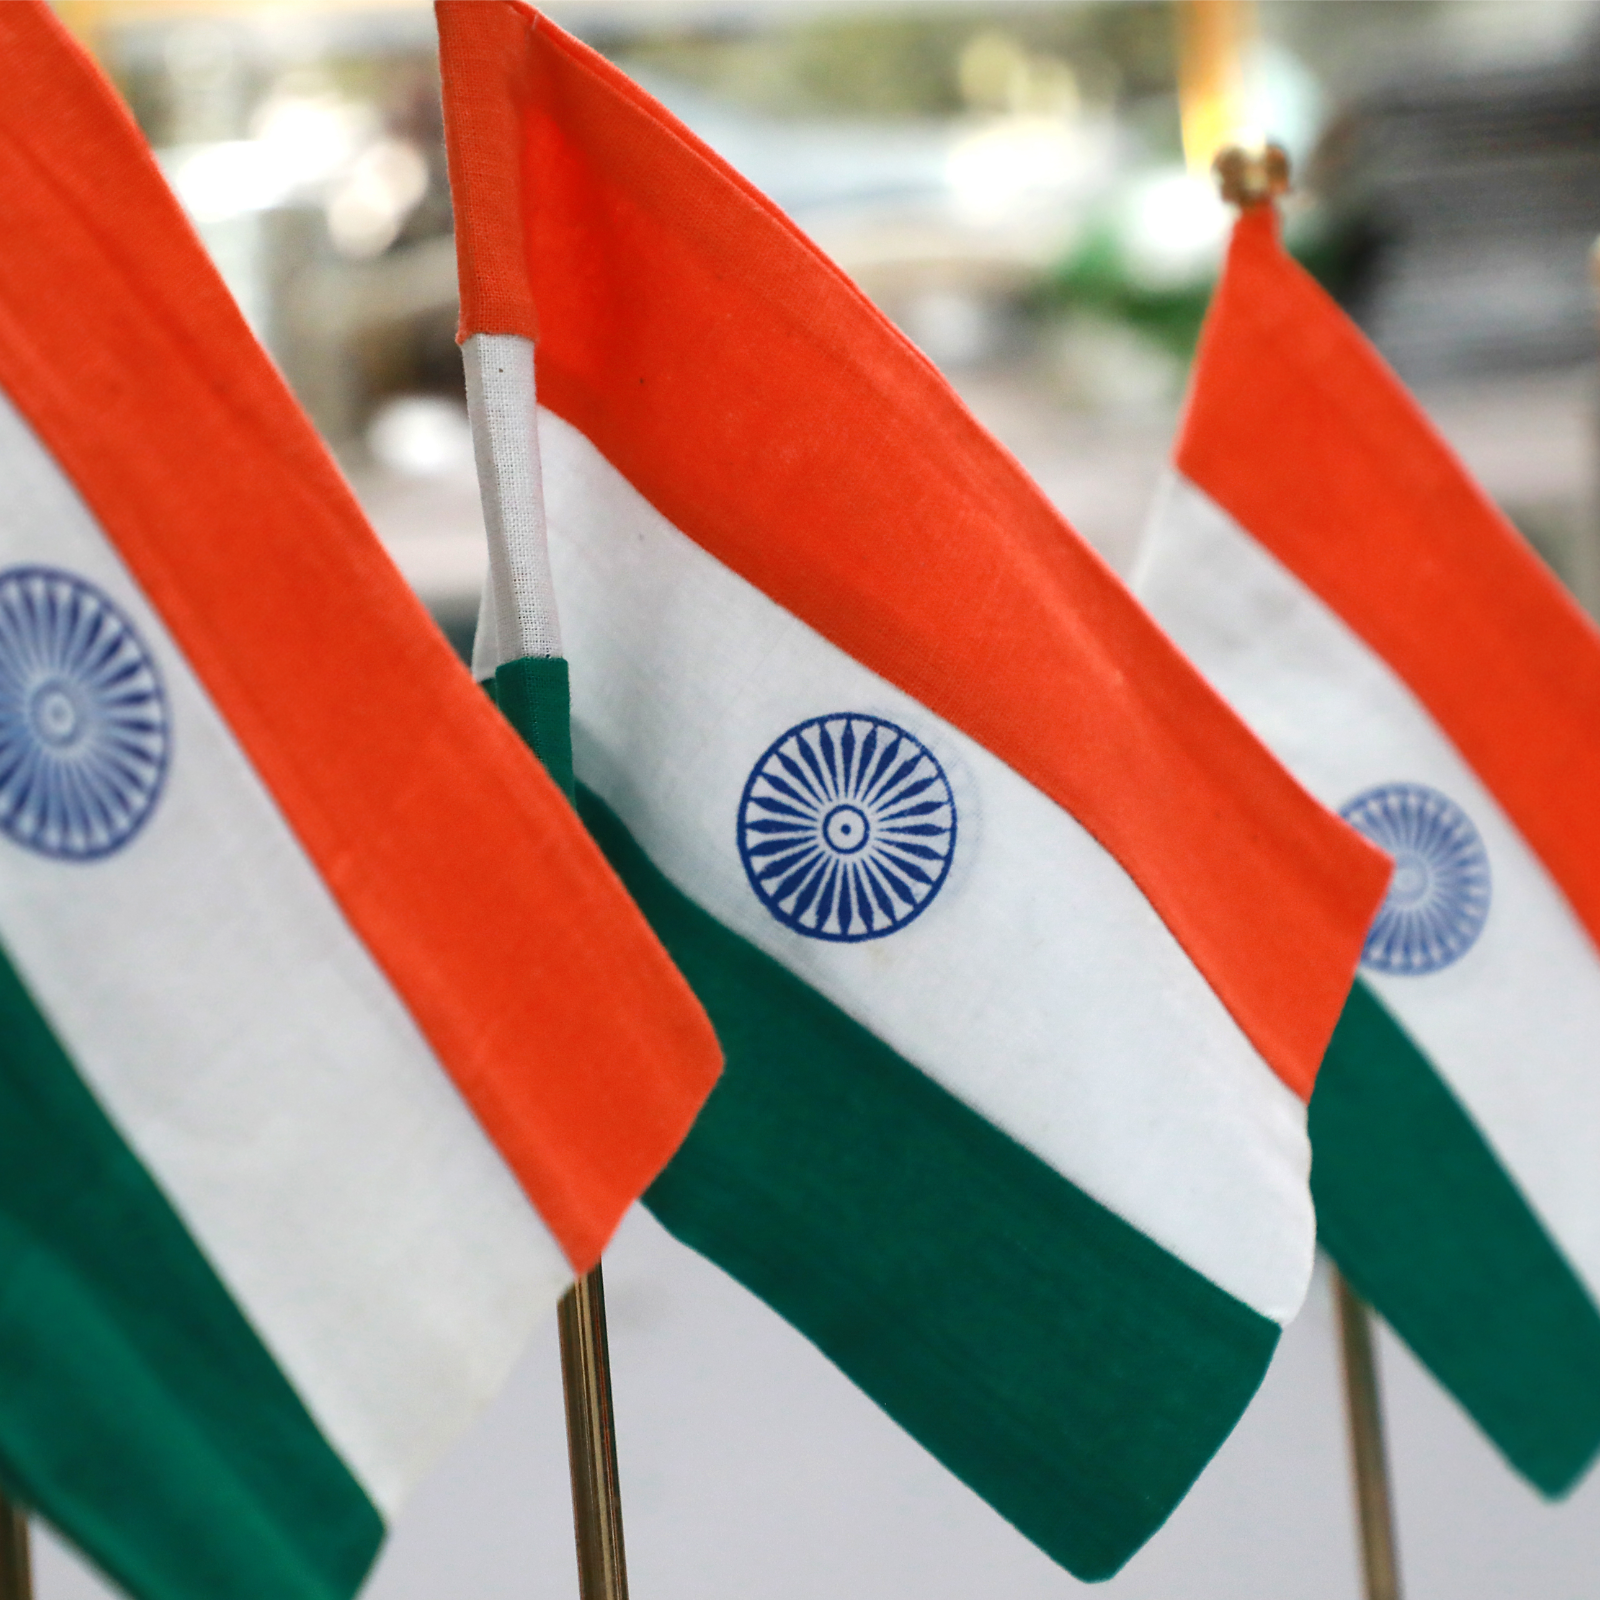 Indian Government-Appointed Commission Recognizes Crypto as Means of Payment